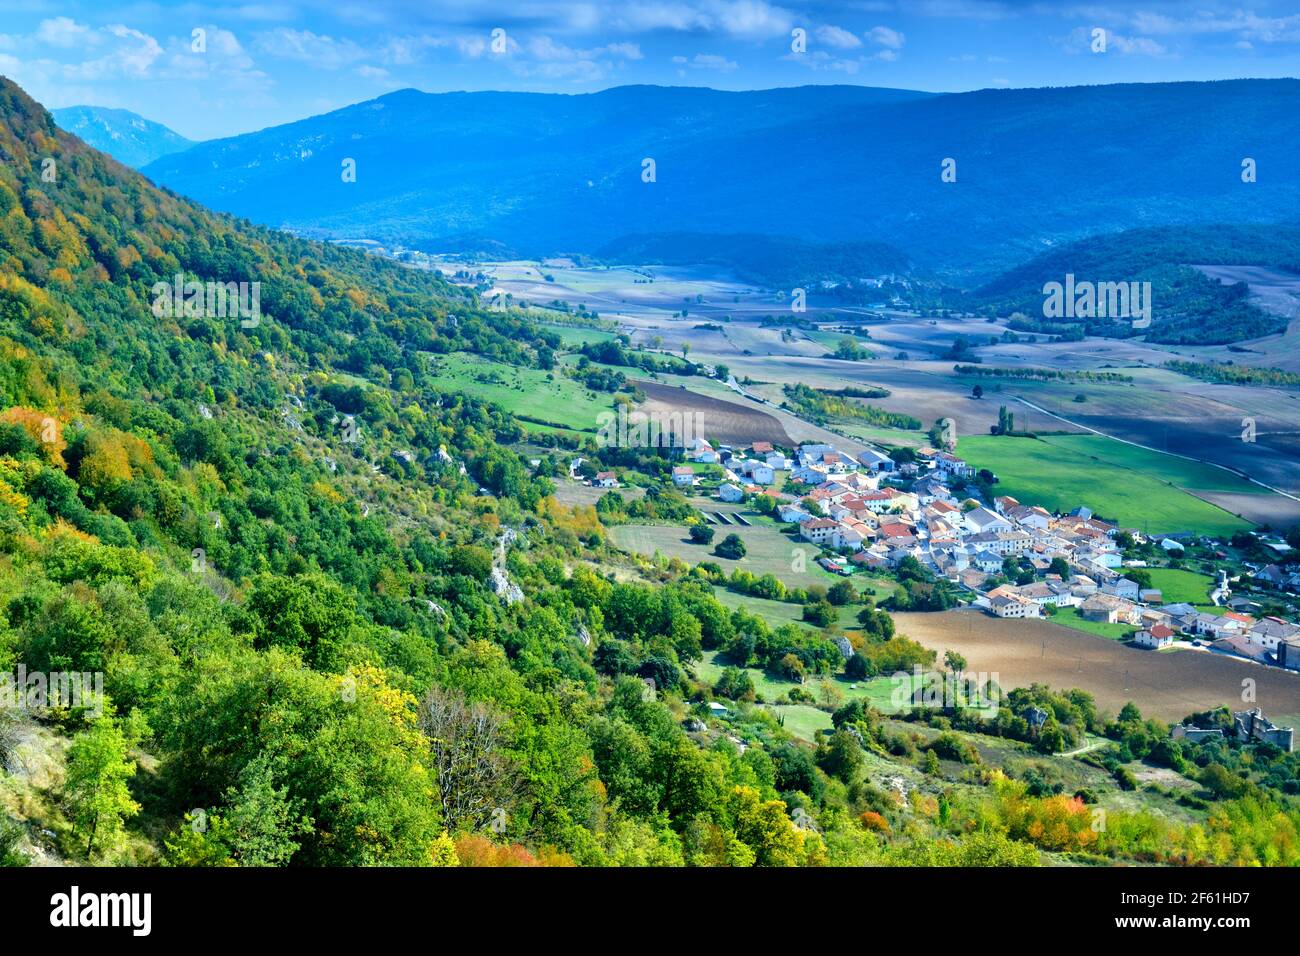 Village in a rural place. Stock Photo